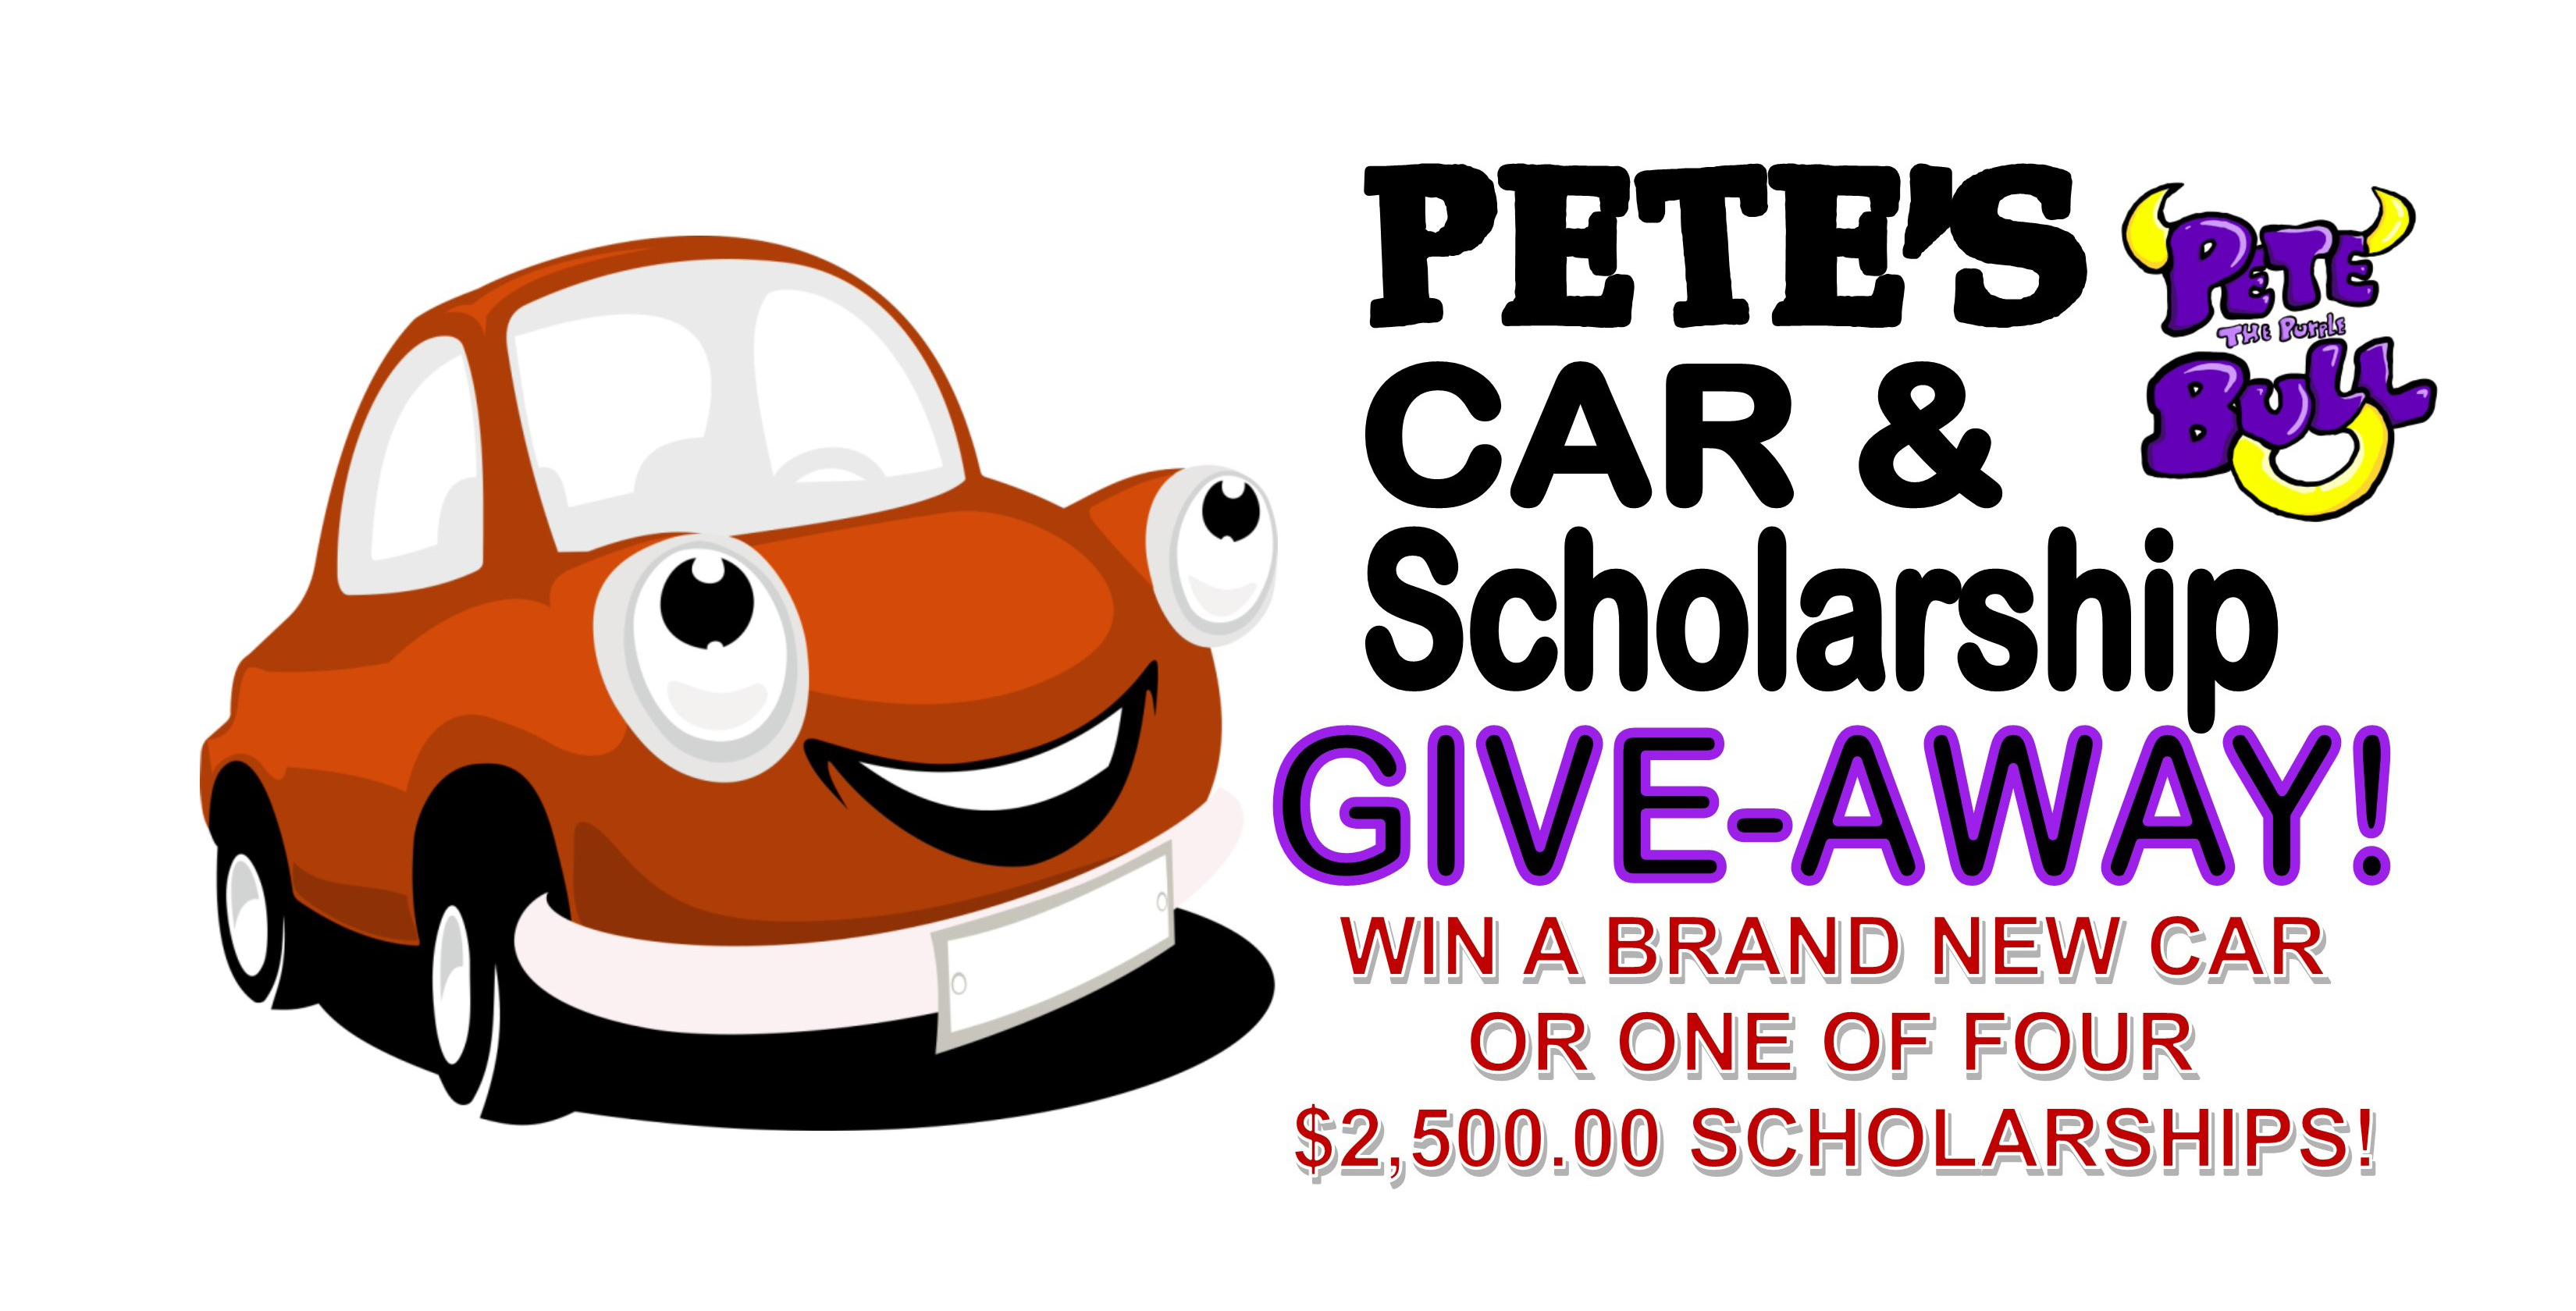 Photo of a stock image car with the words 'Pete's Car and Scholarship Give-Away! Win a brand new car or one of four $2,500.00 scholarships!'